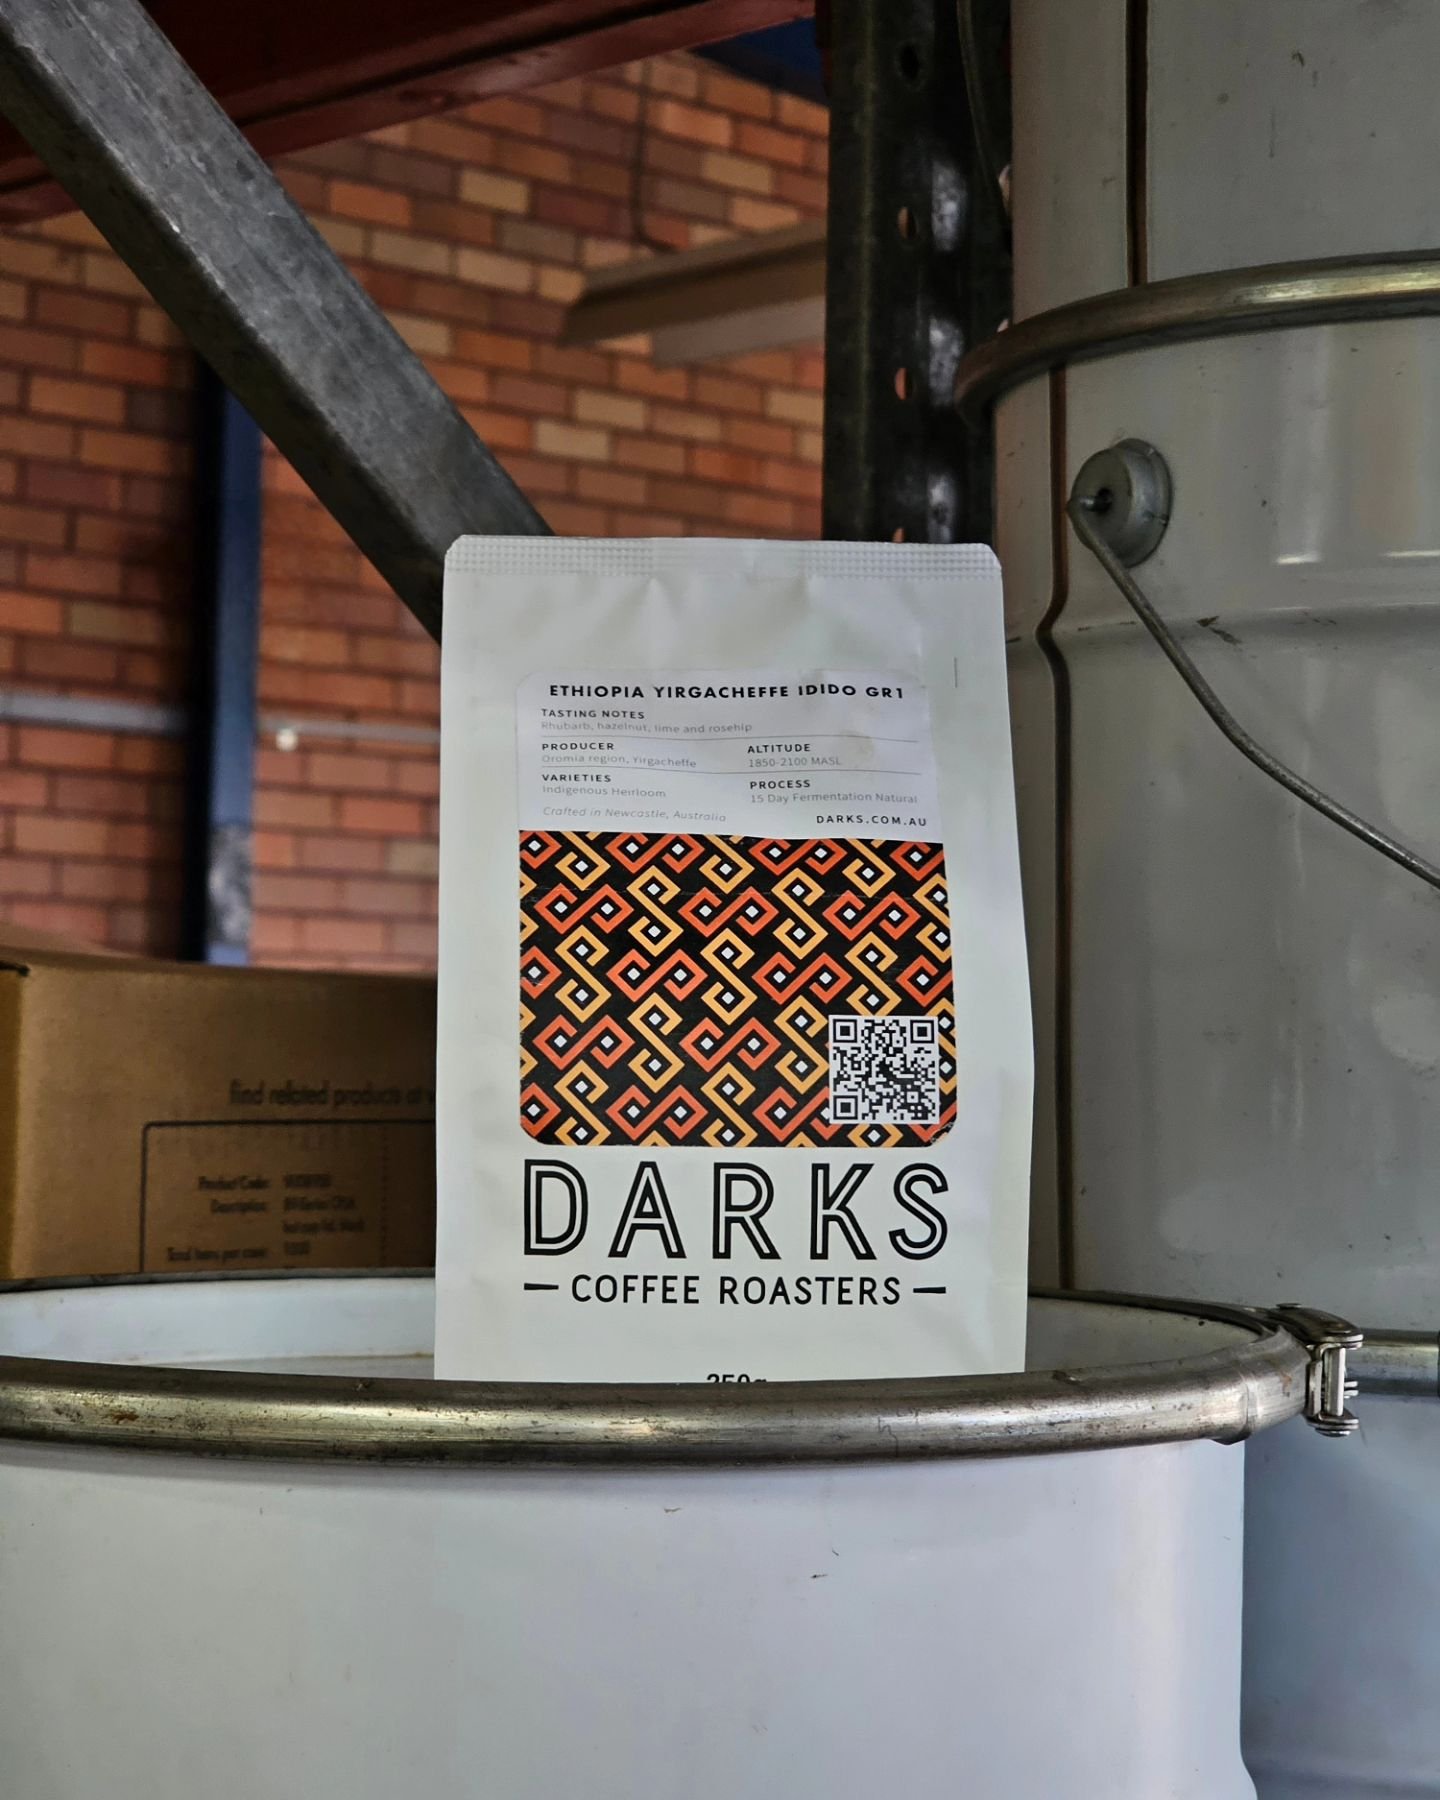 Our Ethiopian Yirgacheffe Idido | Single Origin Pre-Sale Ends Soon!!!☕️

Head to our website to grab a bag of these premium roast before they are sold out!

#darkscoffeeroaster #singleorigincoffee #yirgacheffe